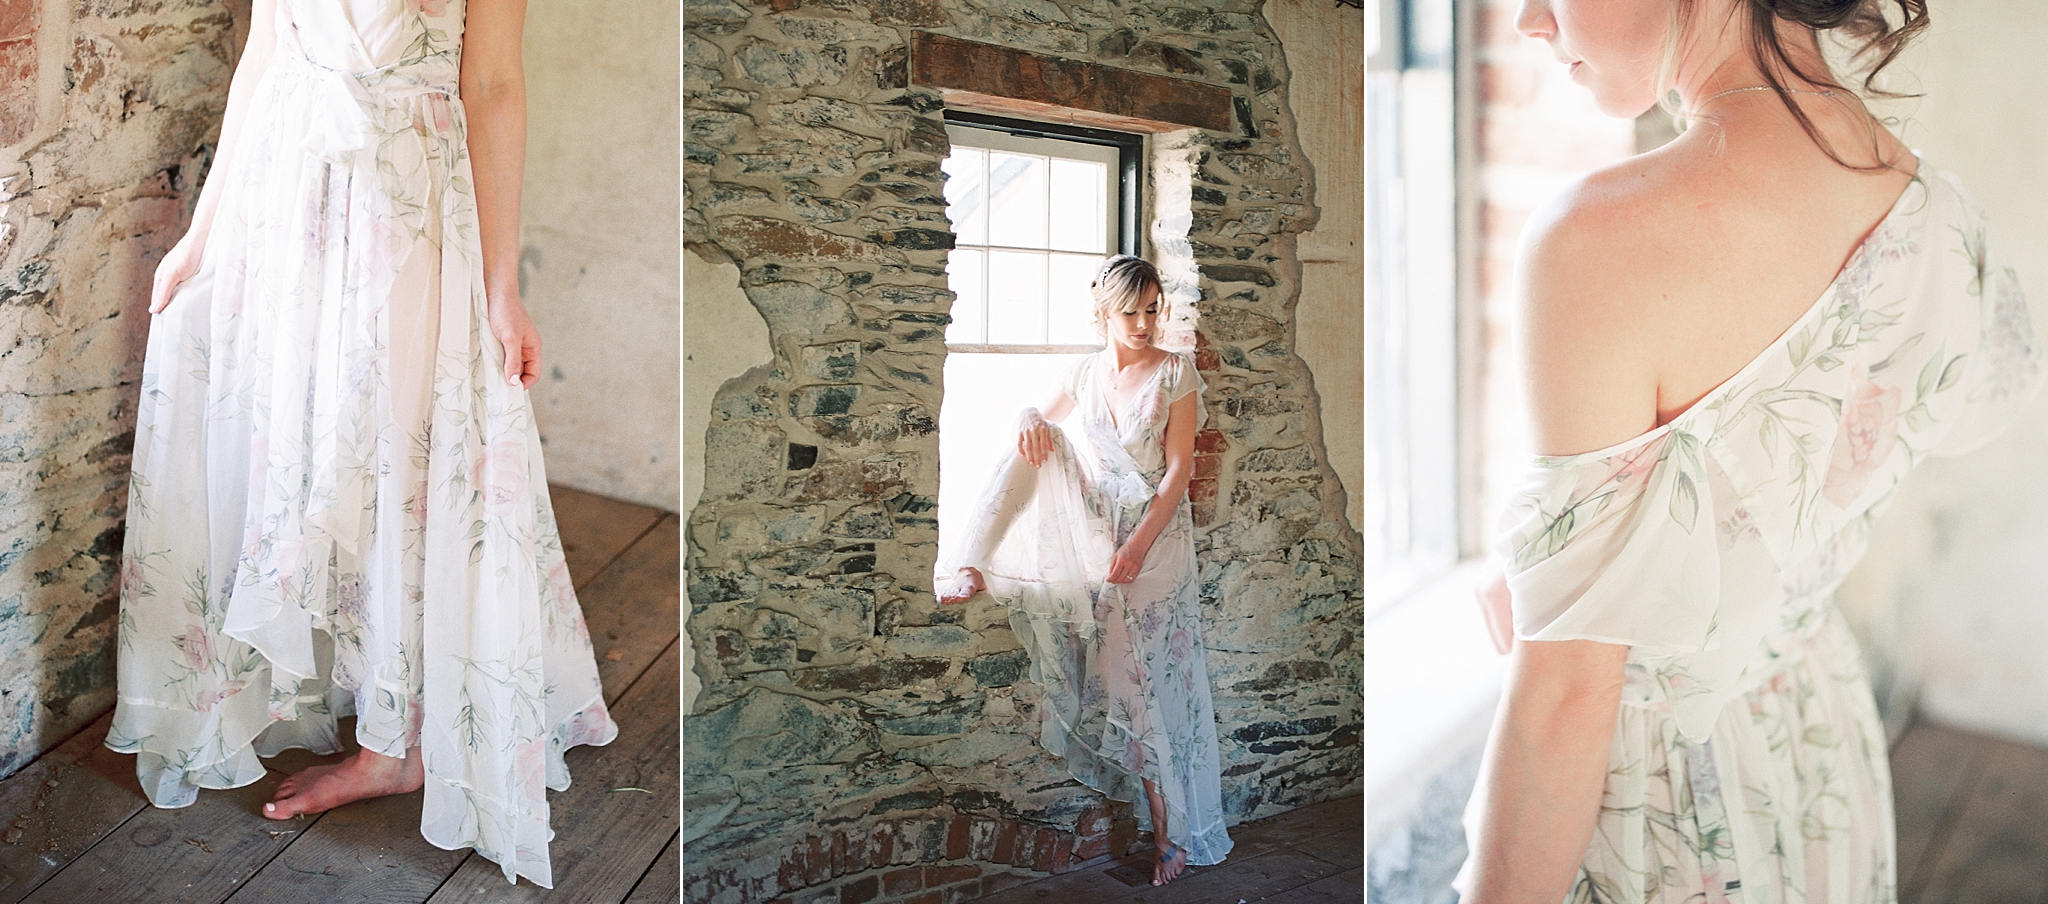 Classic and timeless boudoir portraits are captured by Washington, DC fine art wedding photographer, Alicia Lacey at Oatlands Plantation in Leesburg, VA.